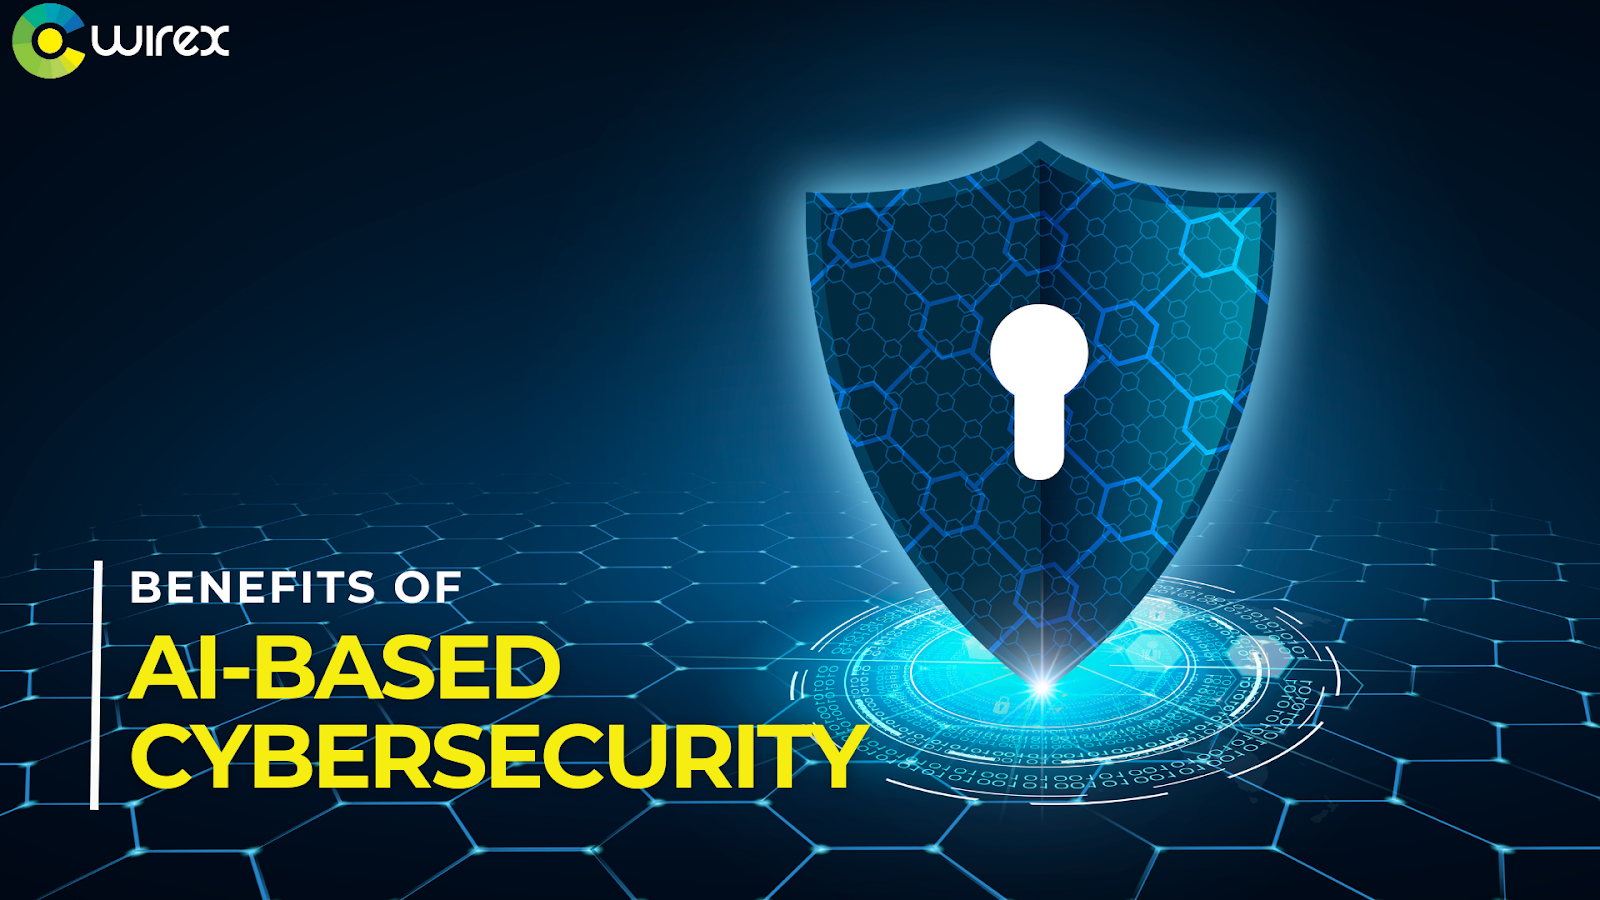 Benefits of AI-based cybersecurity